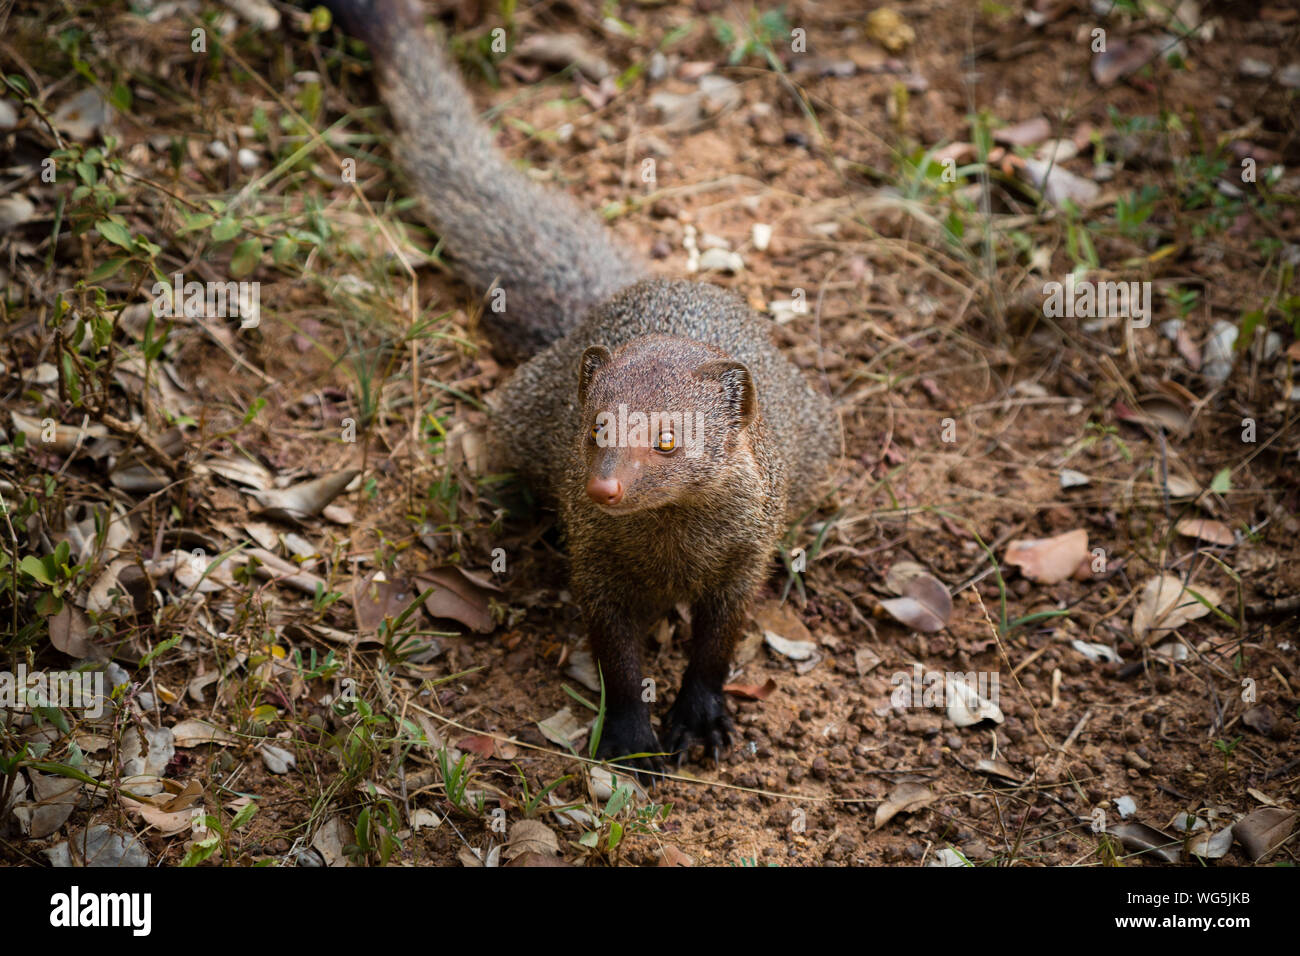 High Angle View Of Small Mammal Stock Photo